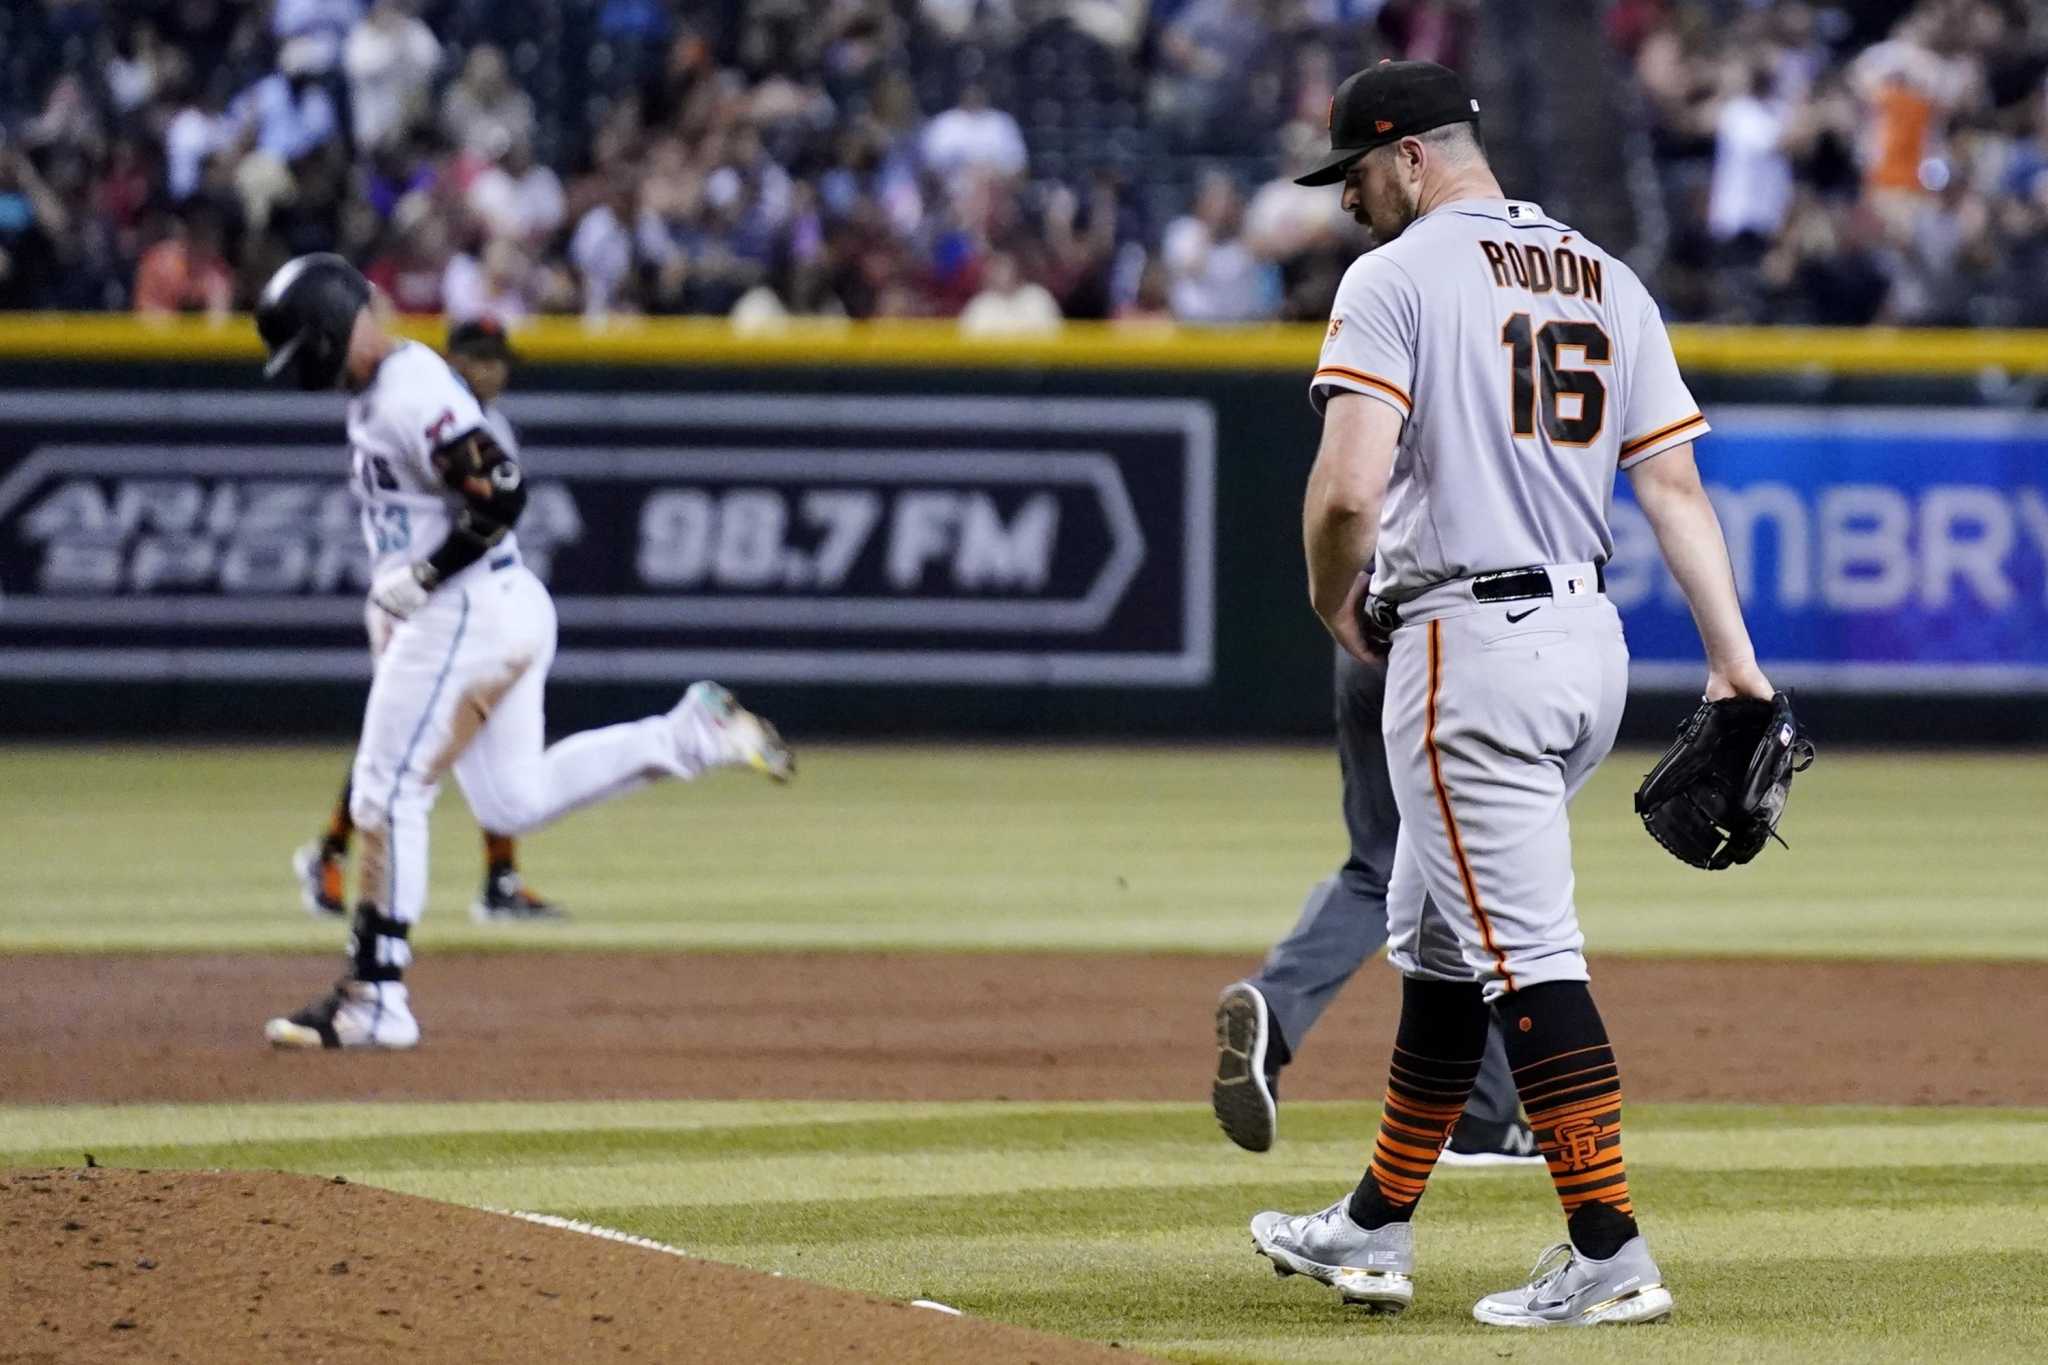 Giants lose again, Carlos Rodón shows frustration in dugout incidents - San Francisco Chronicle